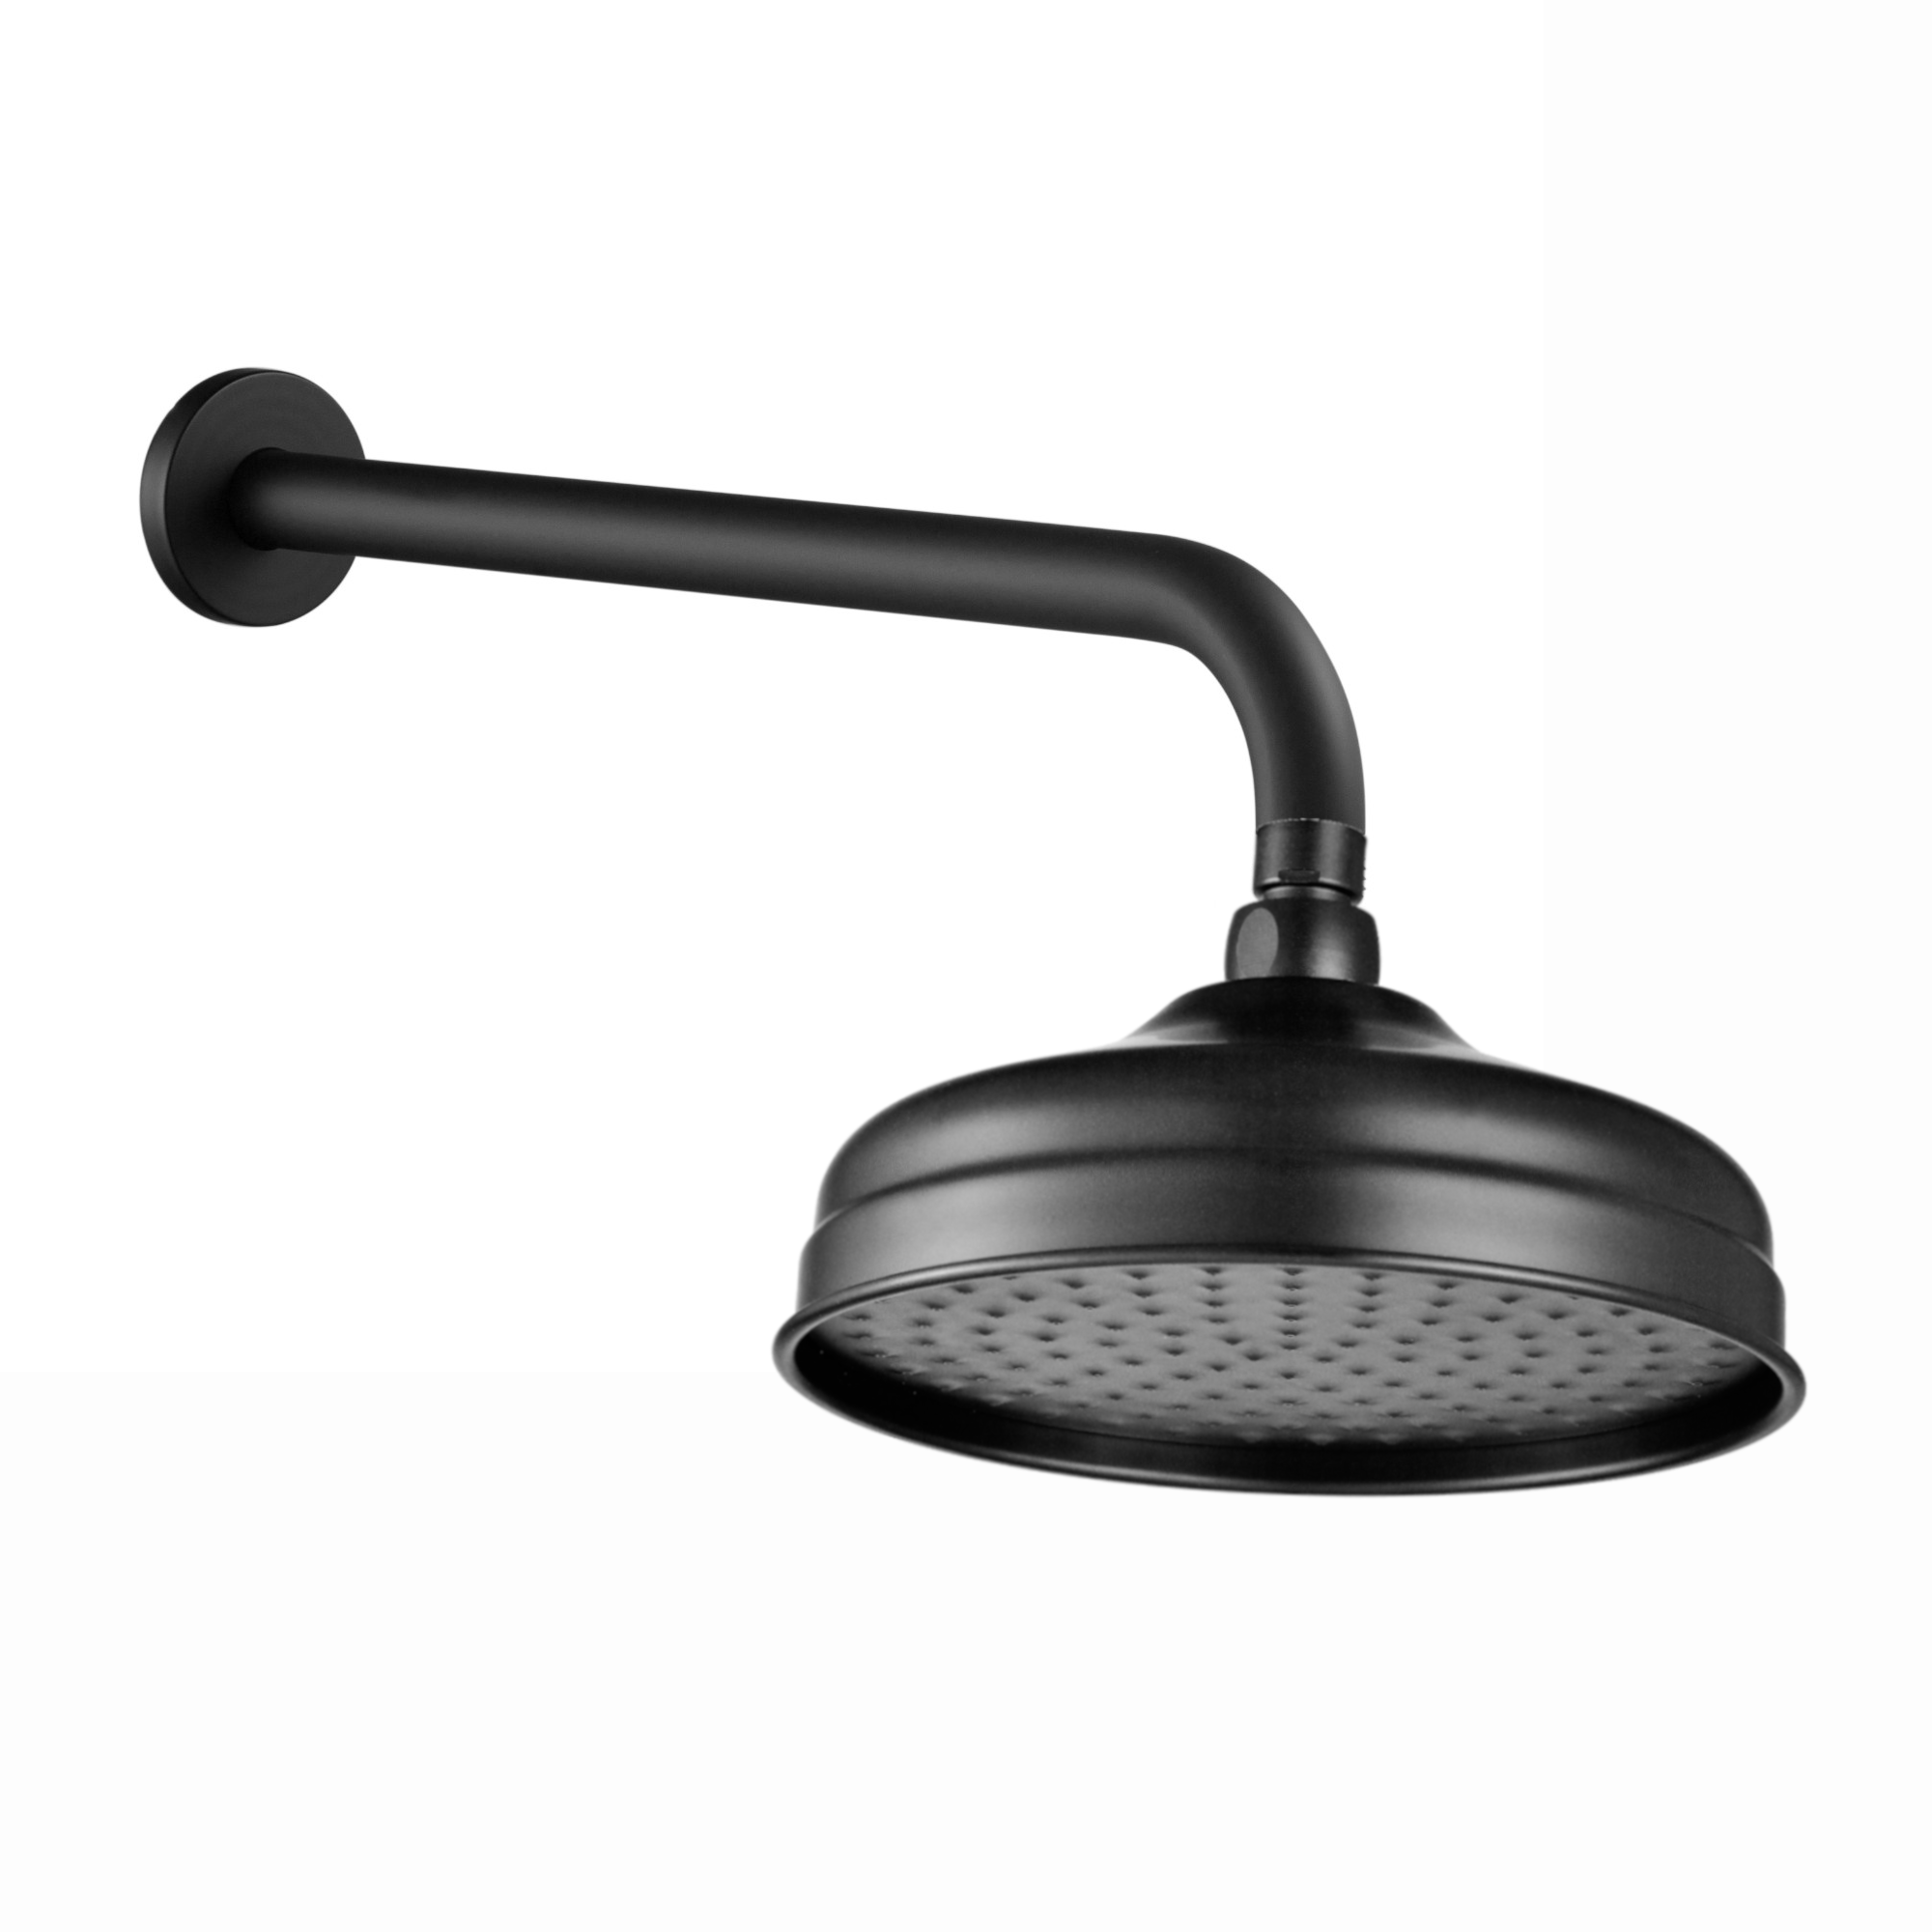 Traditional Wall Fixed Apron Brass Shower Head 8" With Shower Arm - Black